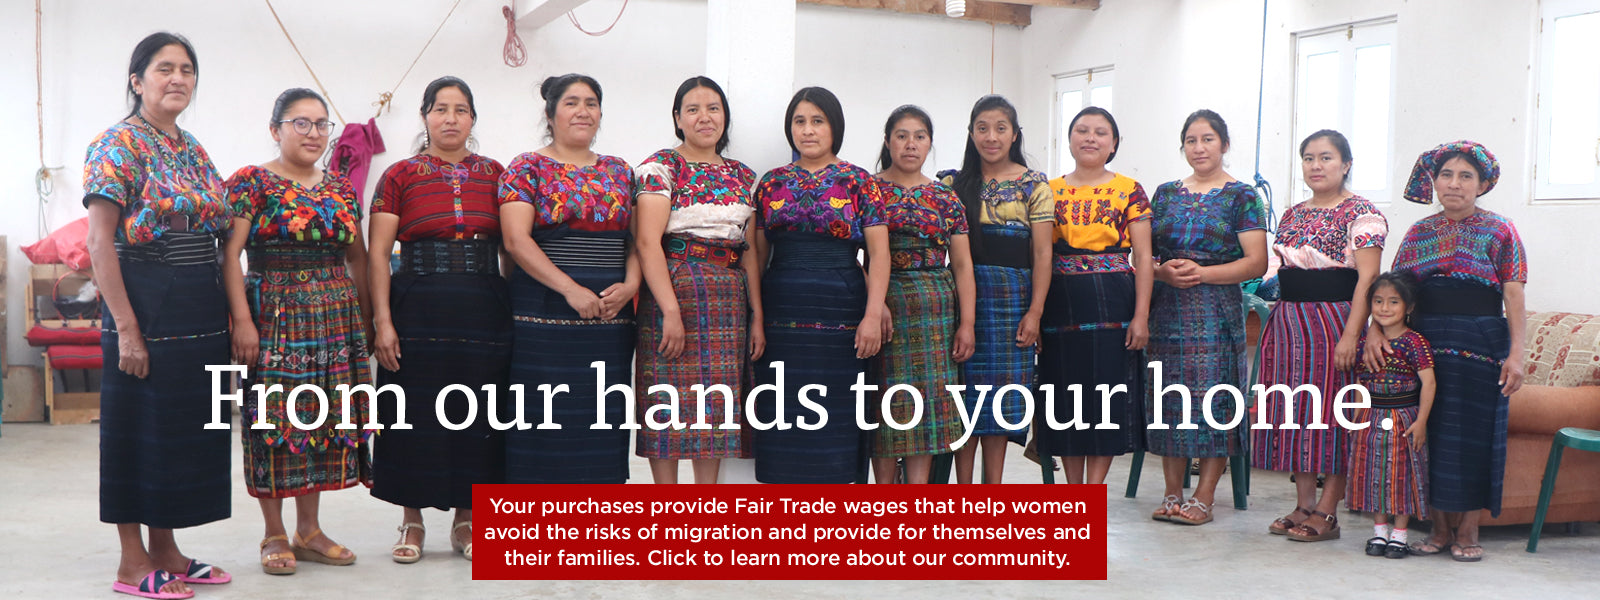 How a Guatemalan women's weaving collective was formed to sell Fair Trade handwoven textiles.